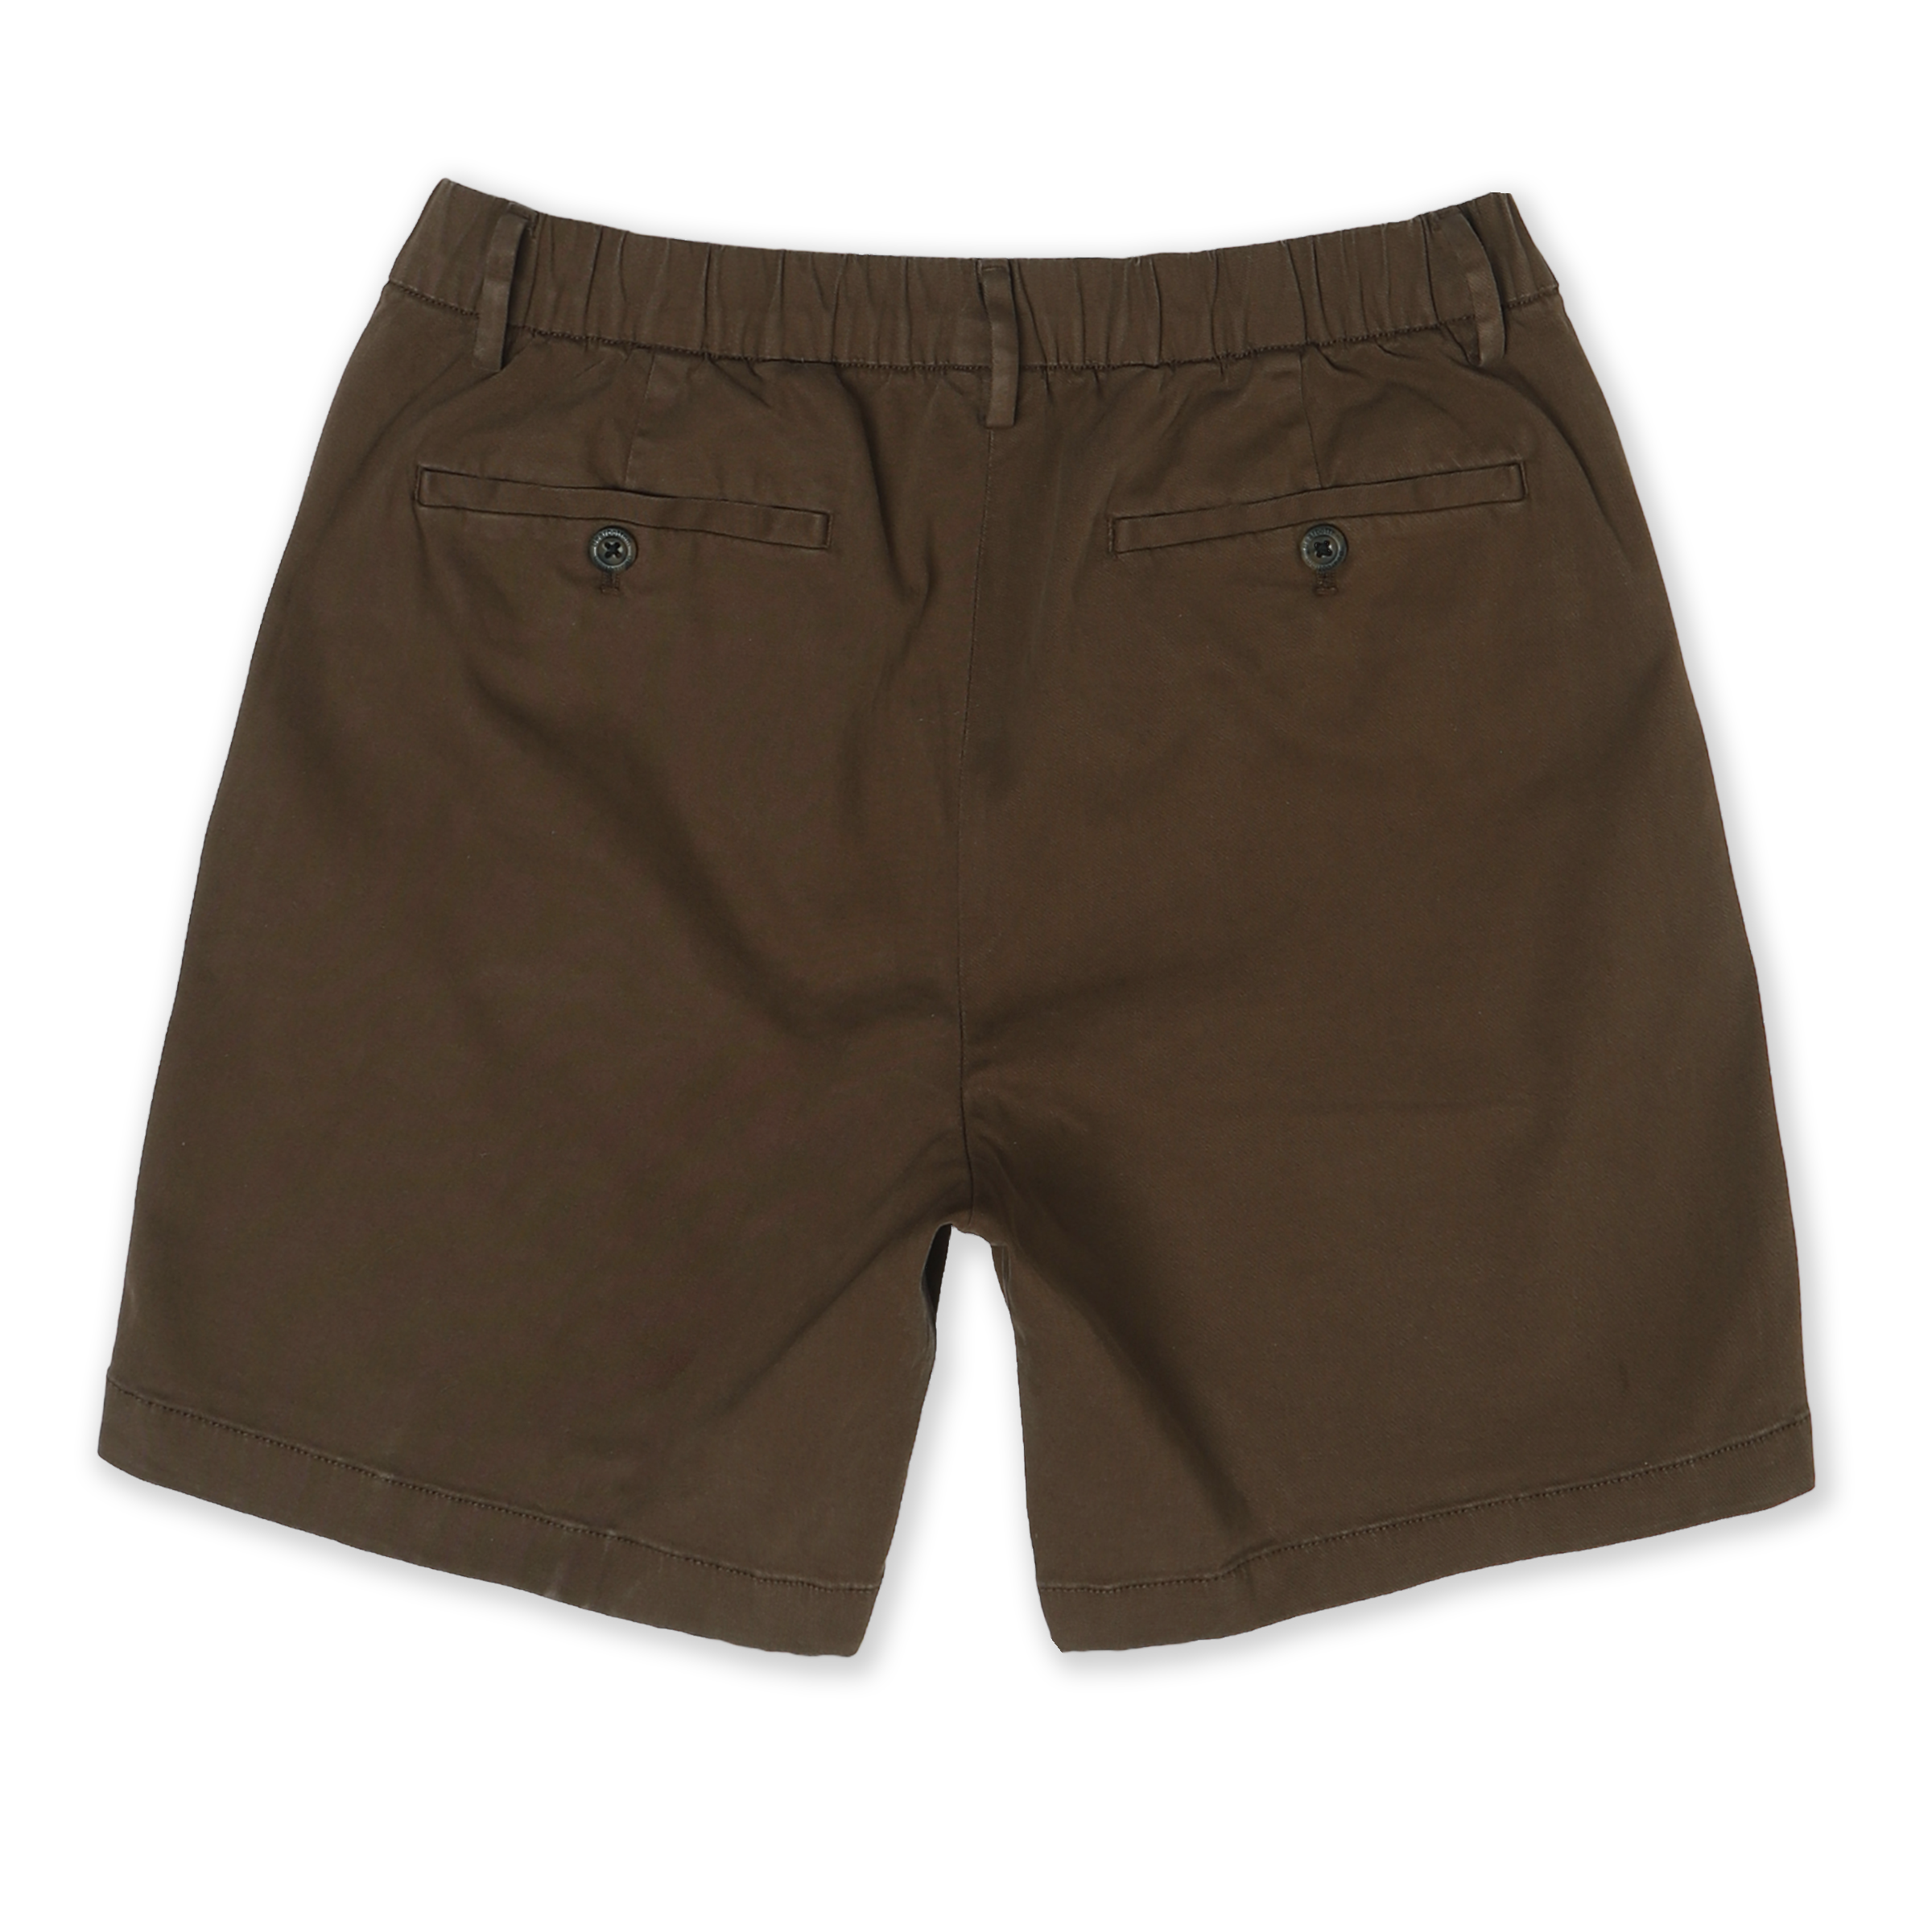 Stretch Chino Short 7" in Cocoa back with elastic waistband, belt loops, and two buttoned welt pockets